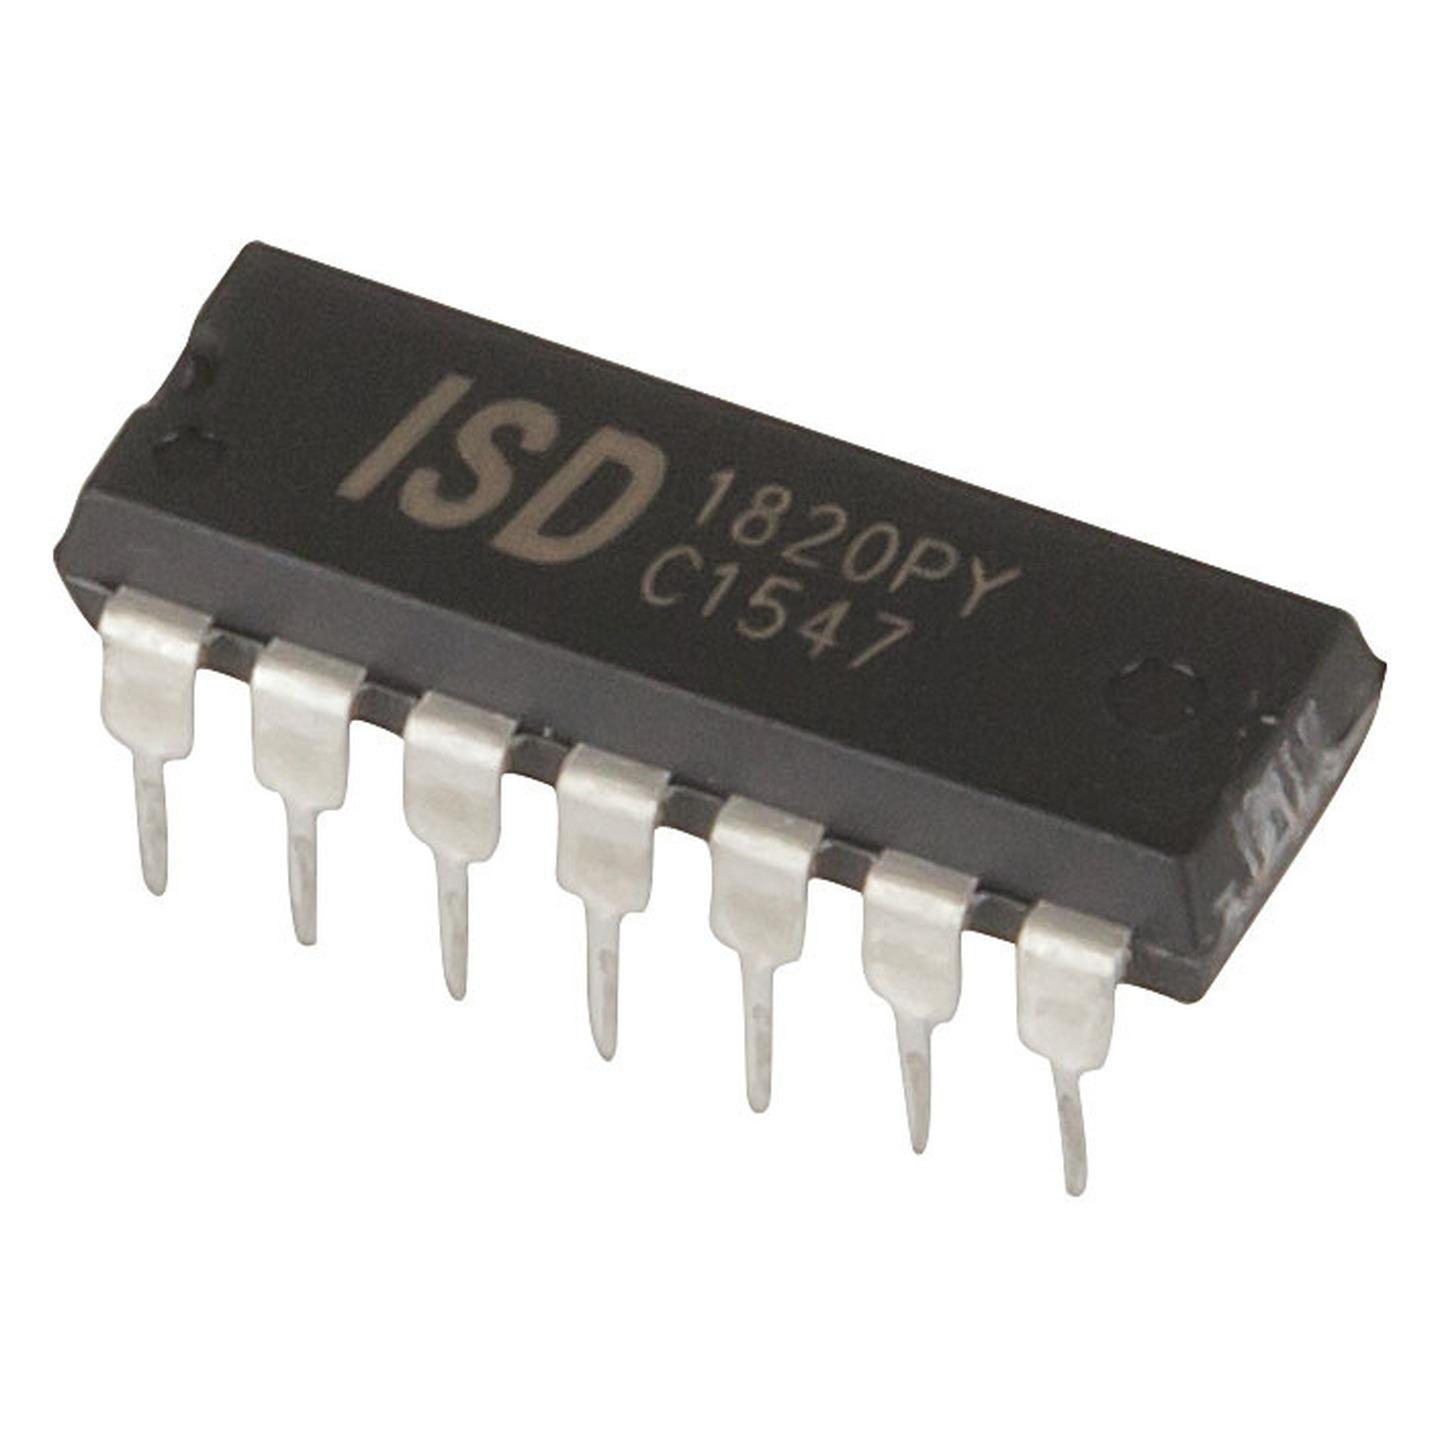 ISD1820 Record and Playback IC DIP14